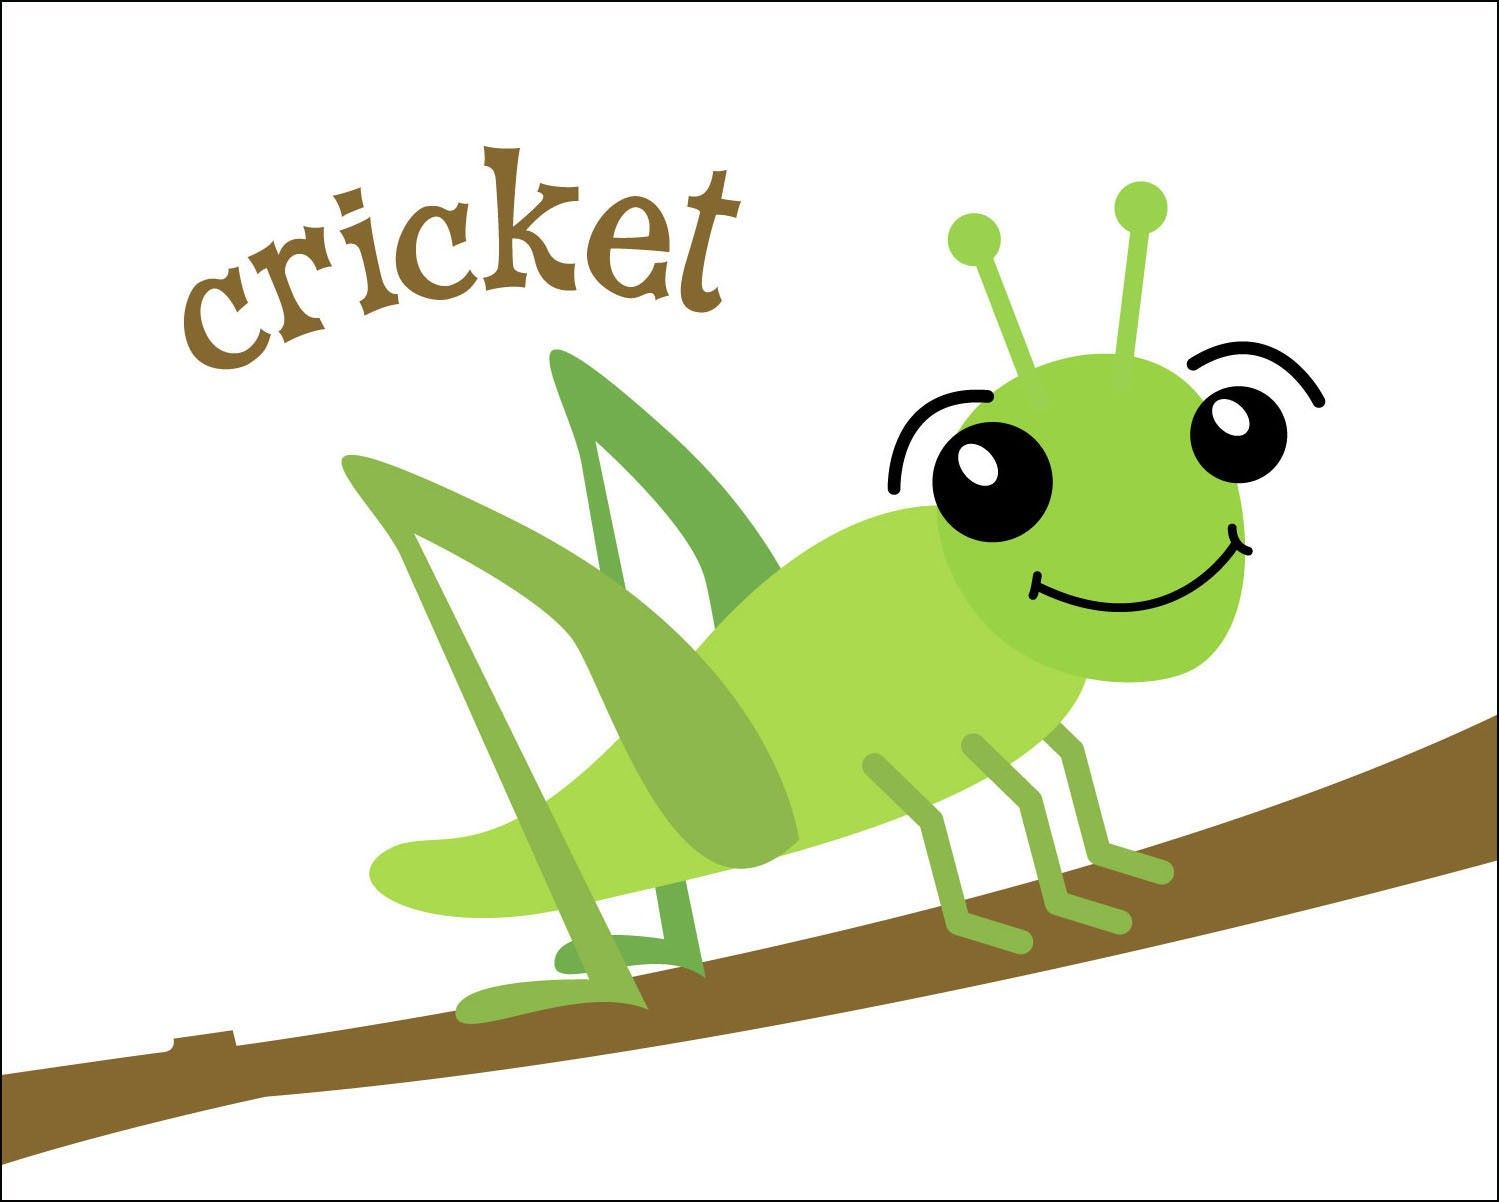 Crickets are annoying, whether in garden or home, and hiring